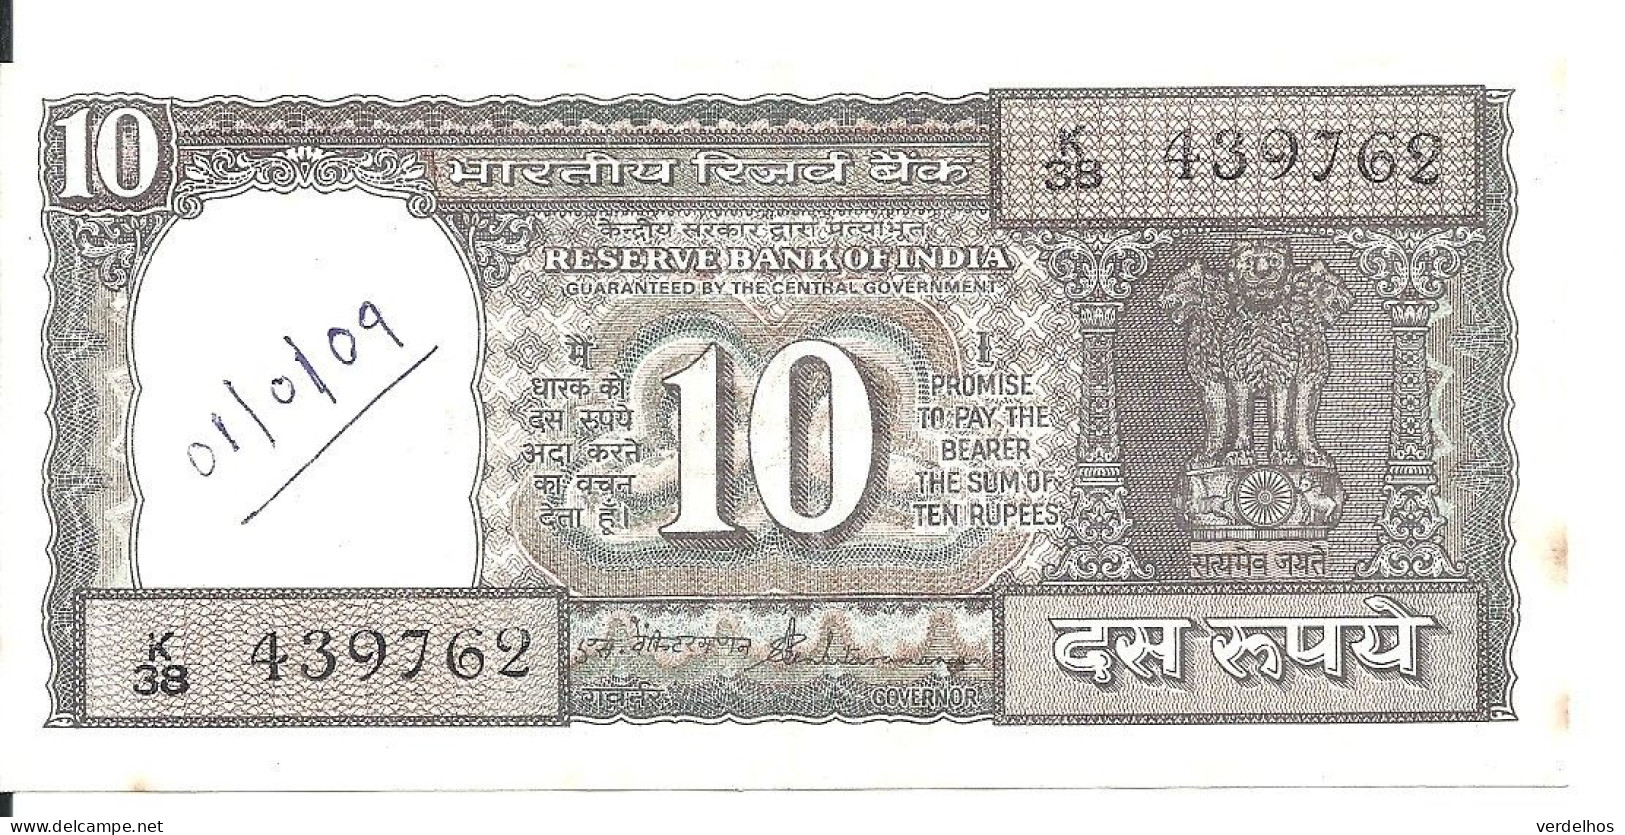 INDE 10 RUPEES ND1997 VF P 60A - India